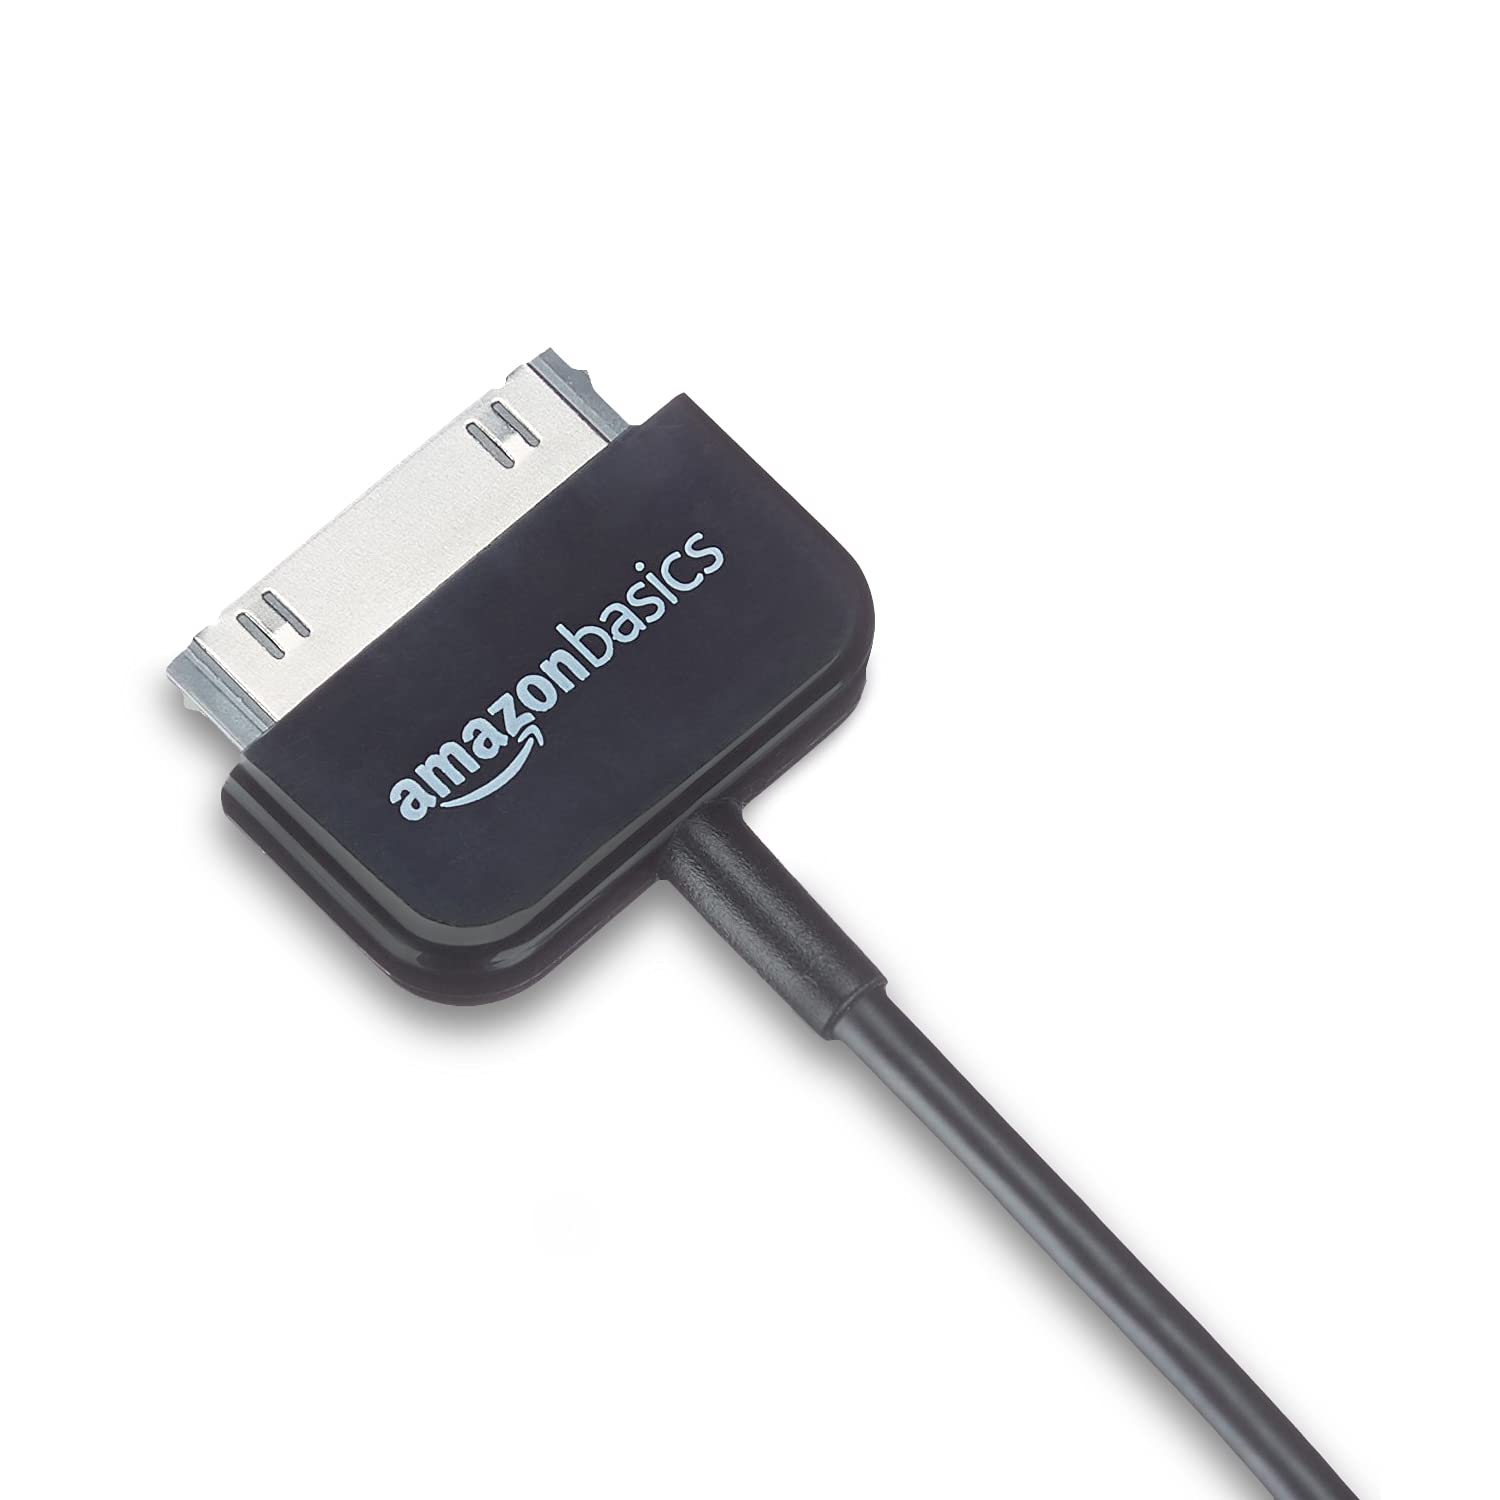 Amazon Basics Apple Certified 30-Pin to USB Charging Cable for Apple iPhone 4, iPod, iPad 3rd Generation, 3.2 Foot, Black